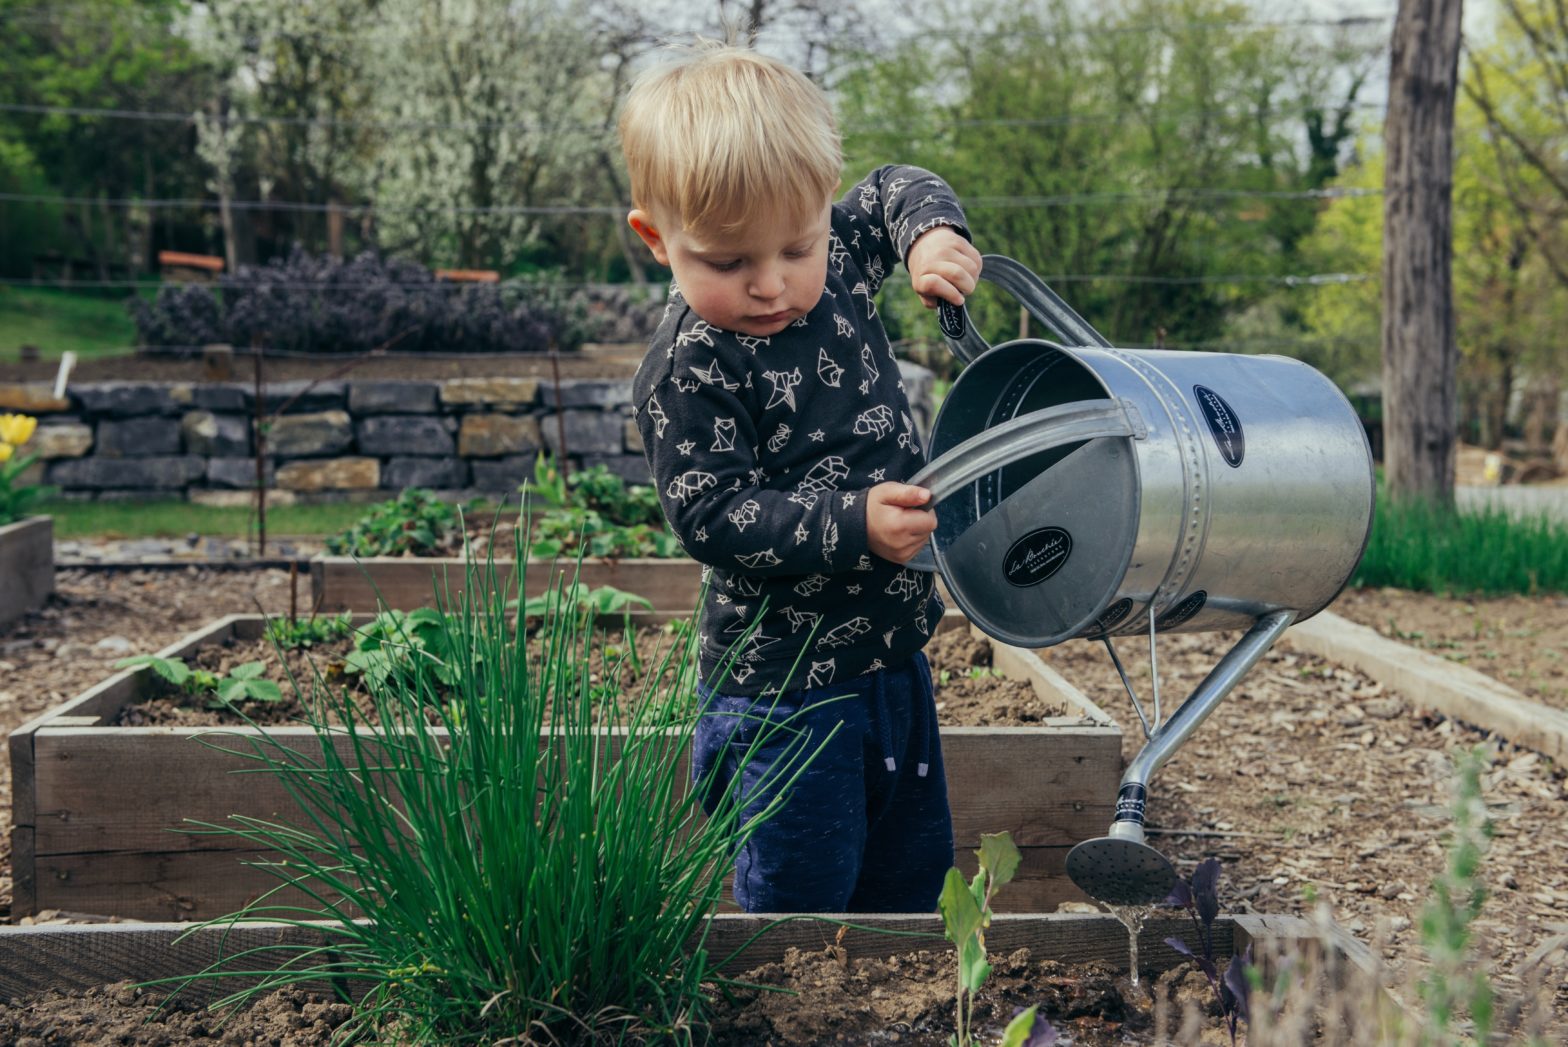 Boy waters a veggie garden with a watering can.